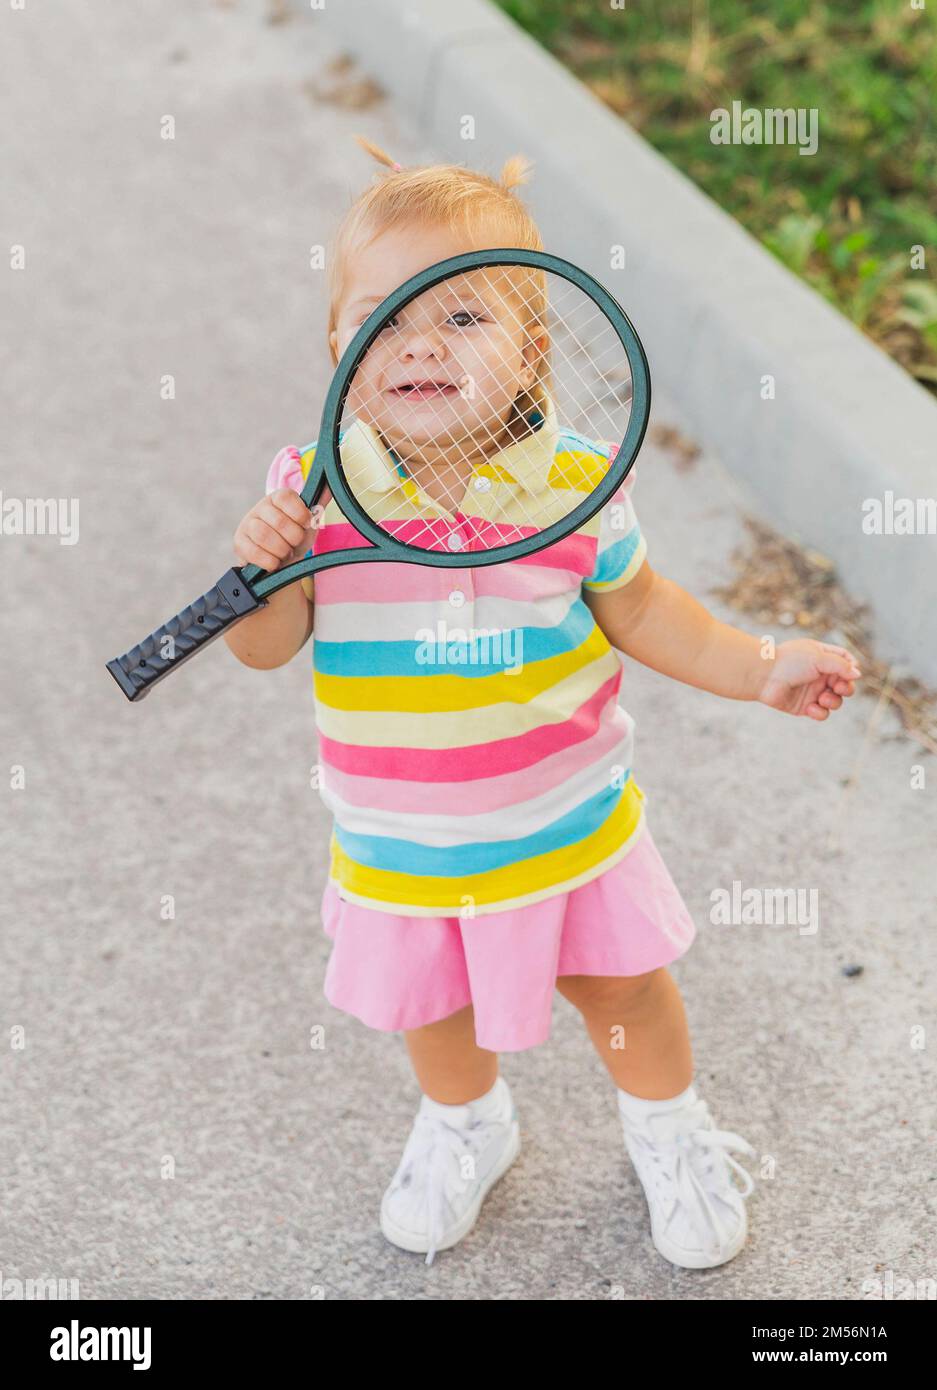 charming little tennis player covered by racket Stock Photo